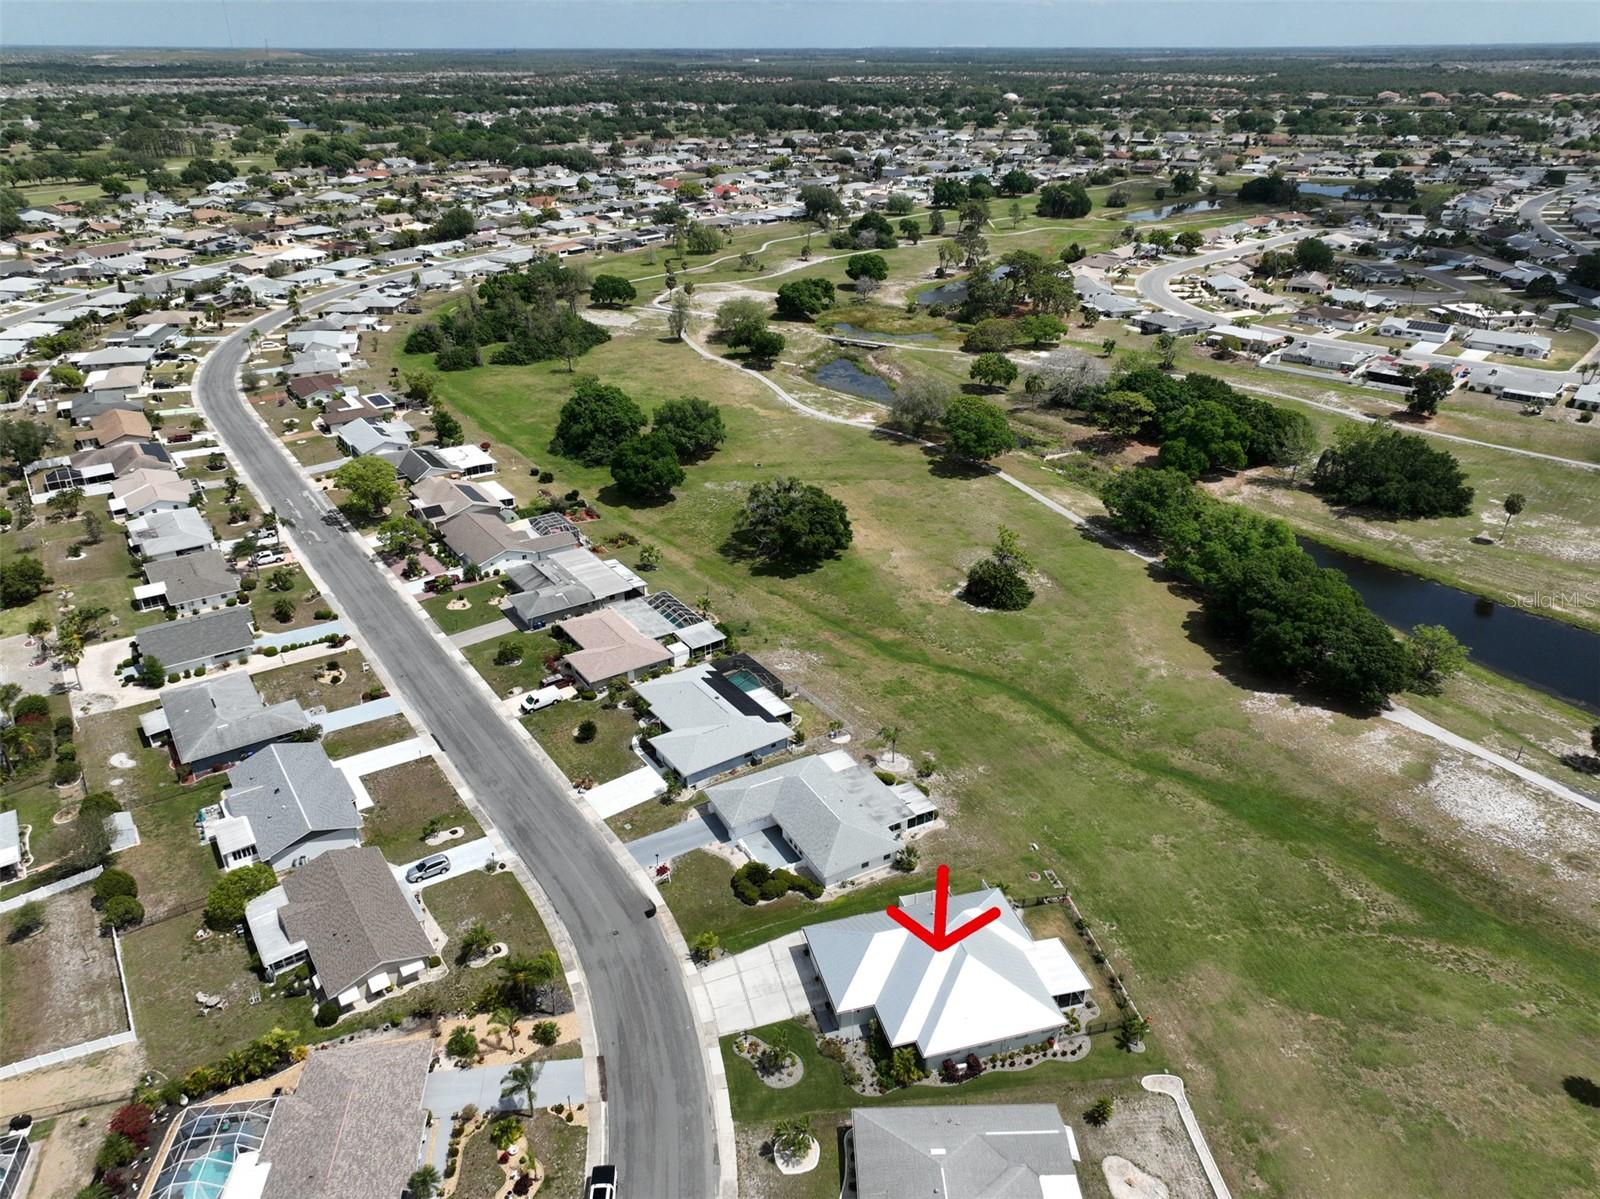 Ariel view of home, outlined with a red arrow.